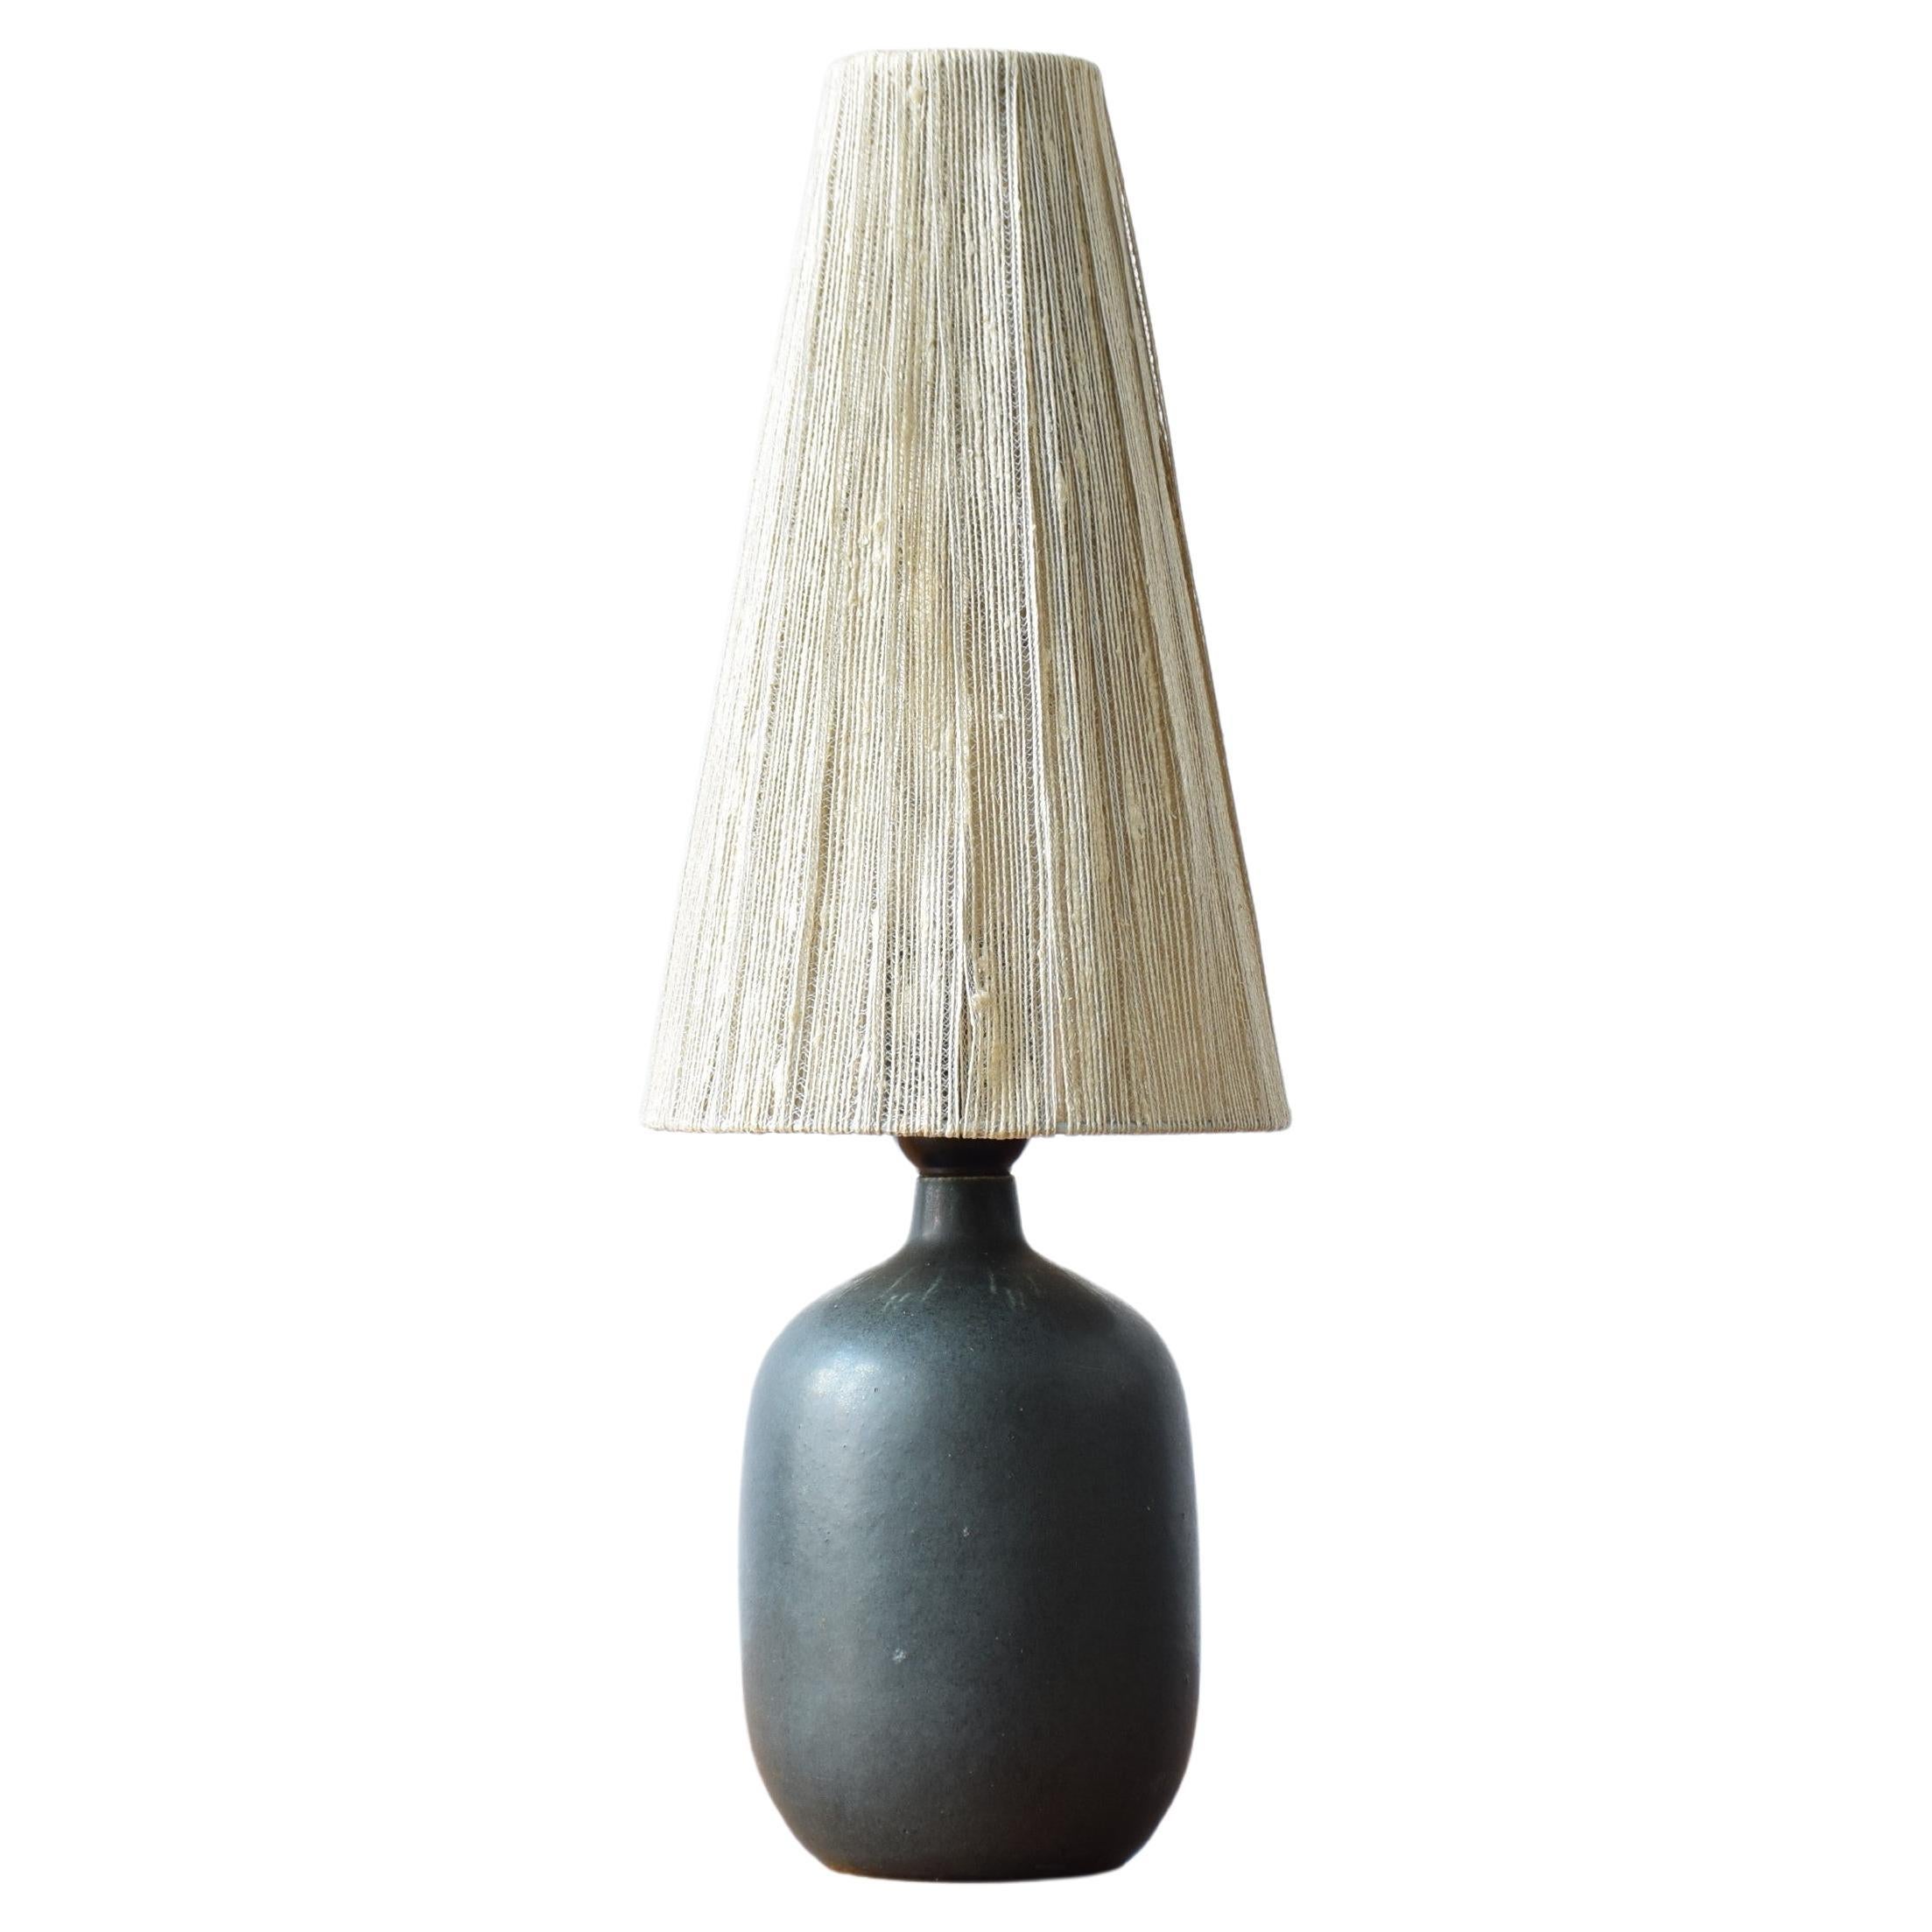 Agne Aronsson Mid-Centúry Stoneware Table Lamp with Original Shade, Sweden 1960s